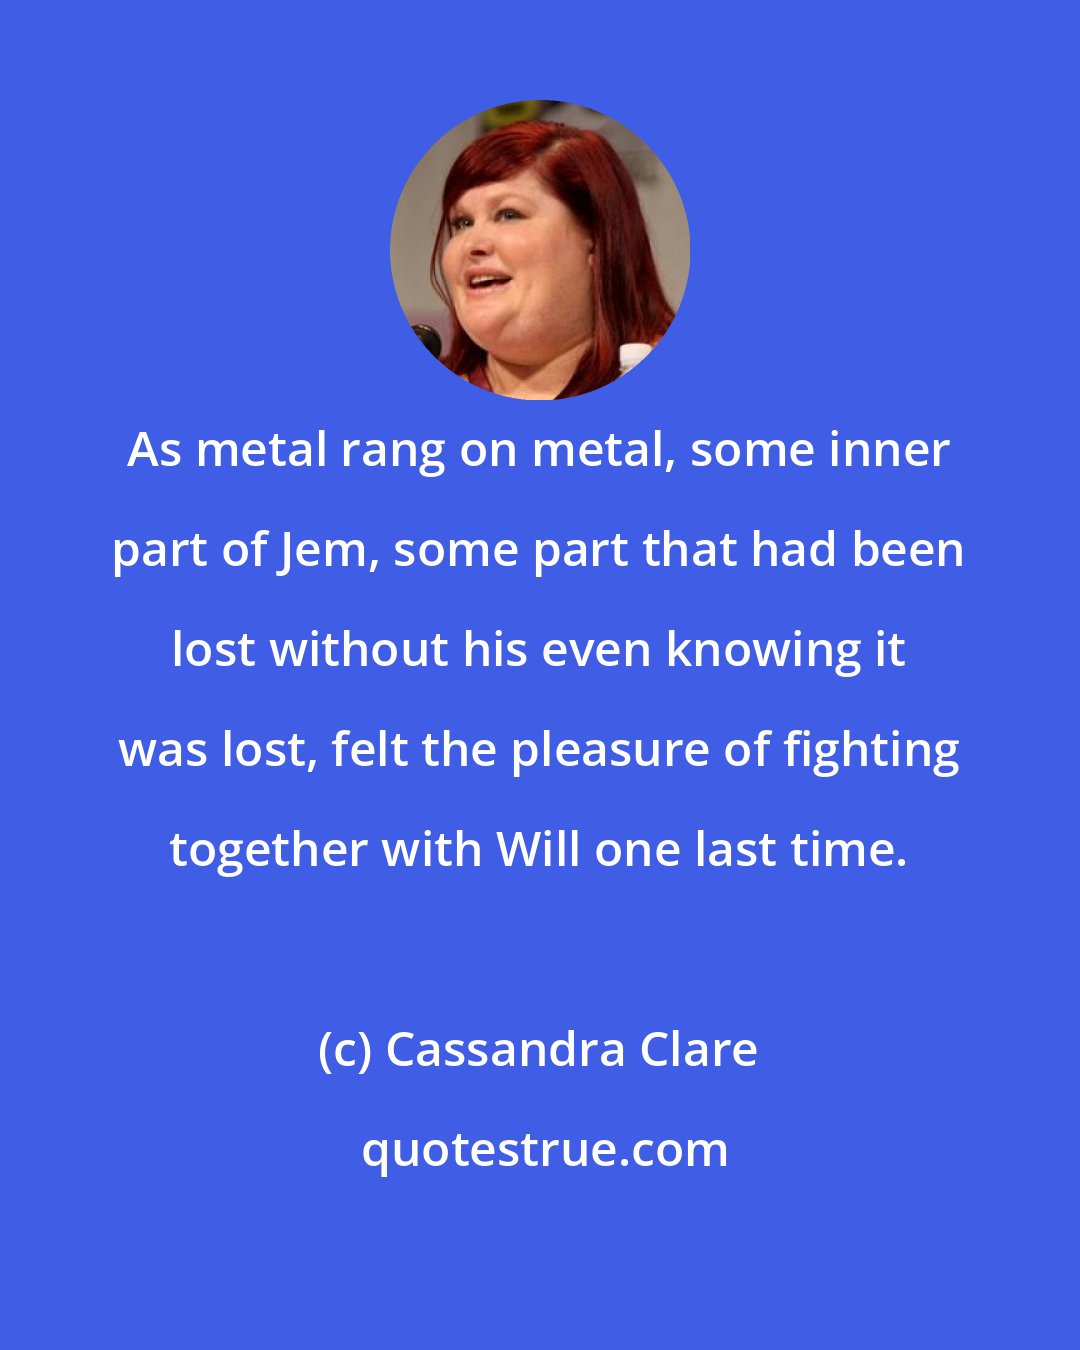 Cassandra Clare: As metal rang on metal, some inner part of Jem, some part that had been lost without his even knowing it was lost, felt the pleasure of fighting together with Will one last time.